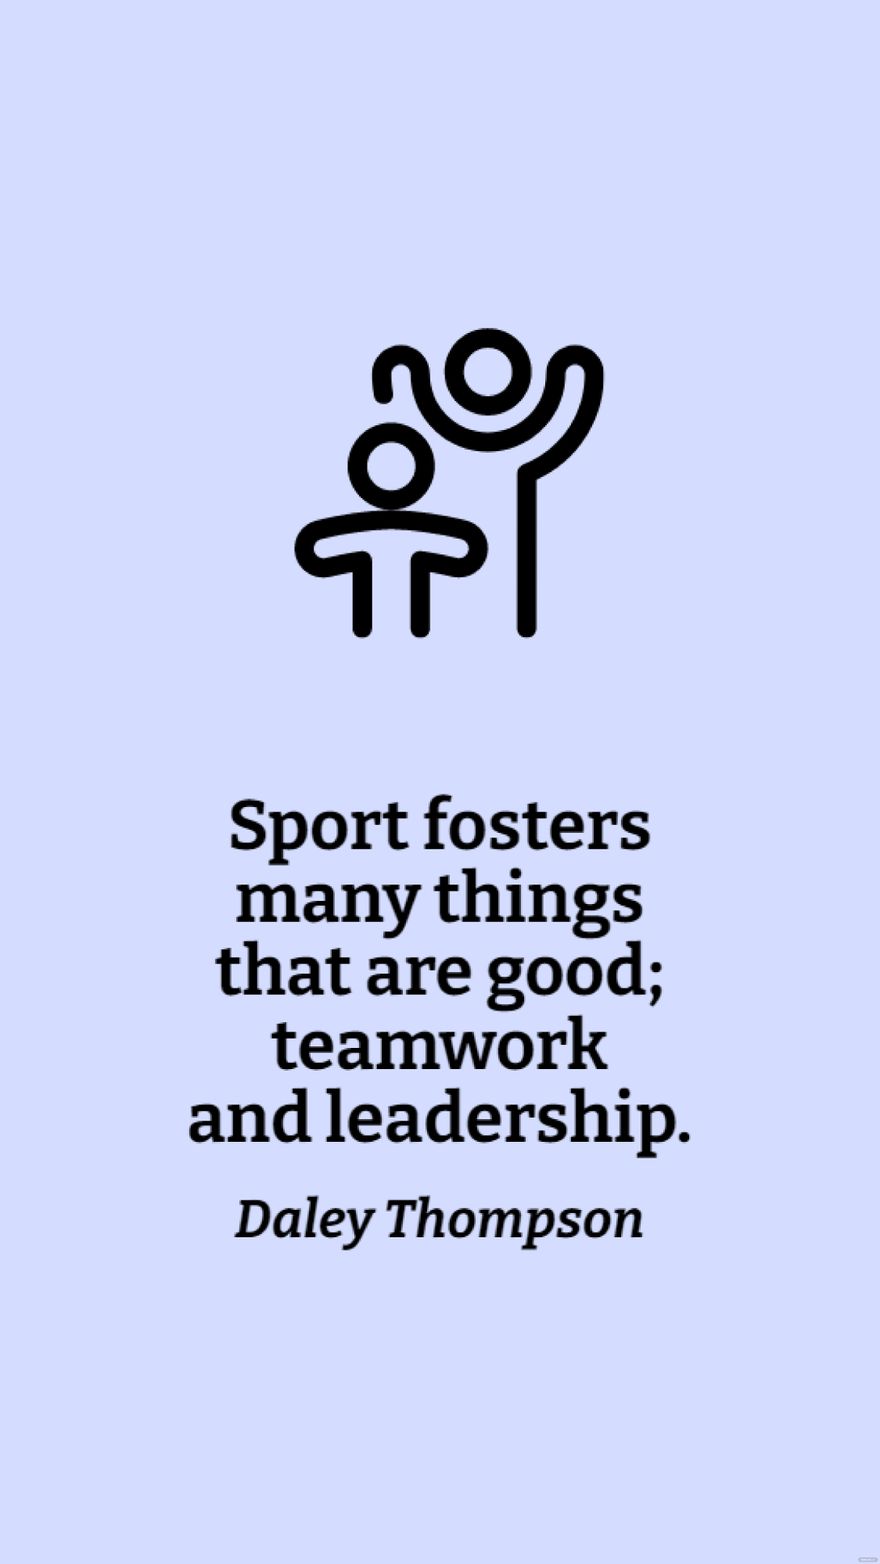 Daley Thompson - Sport fosters many things that are good; teamwork and leadership.